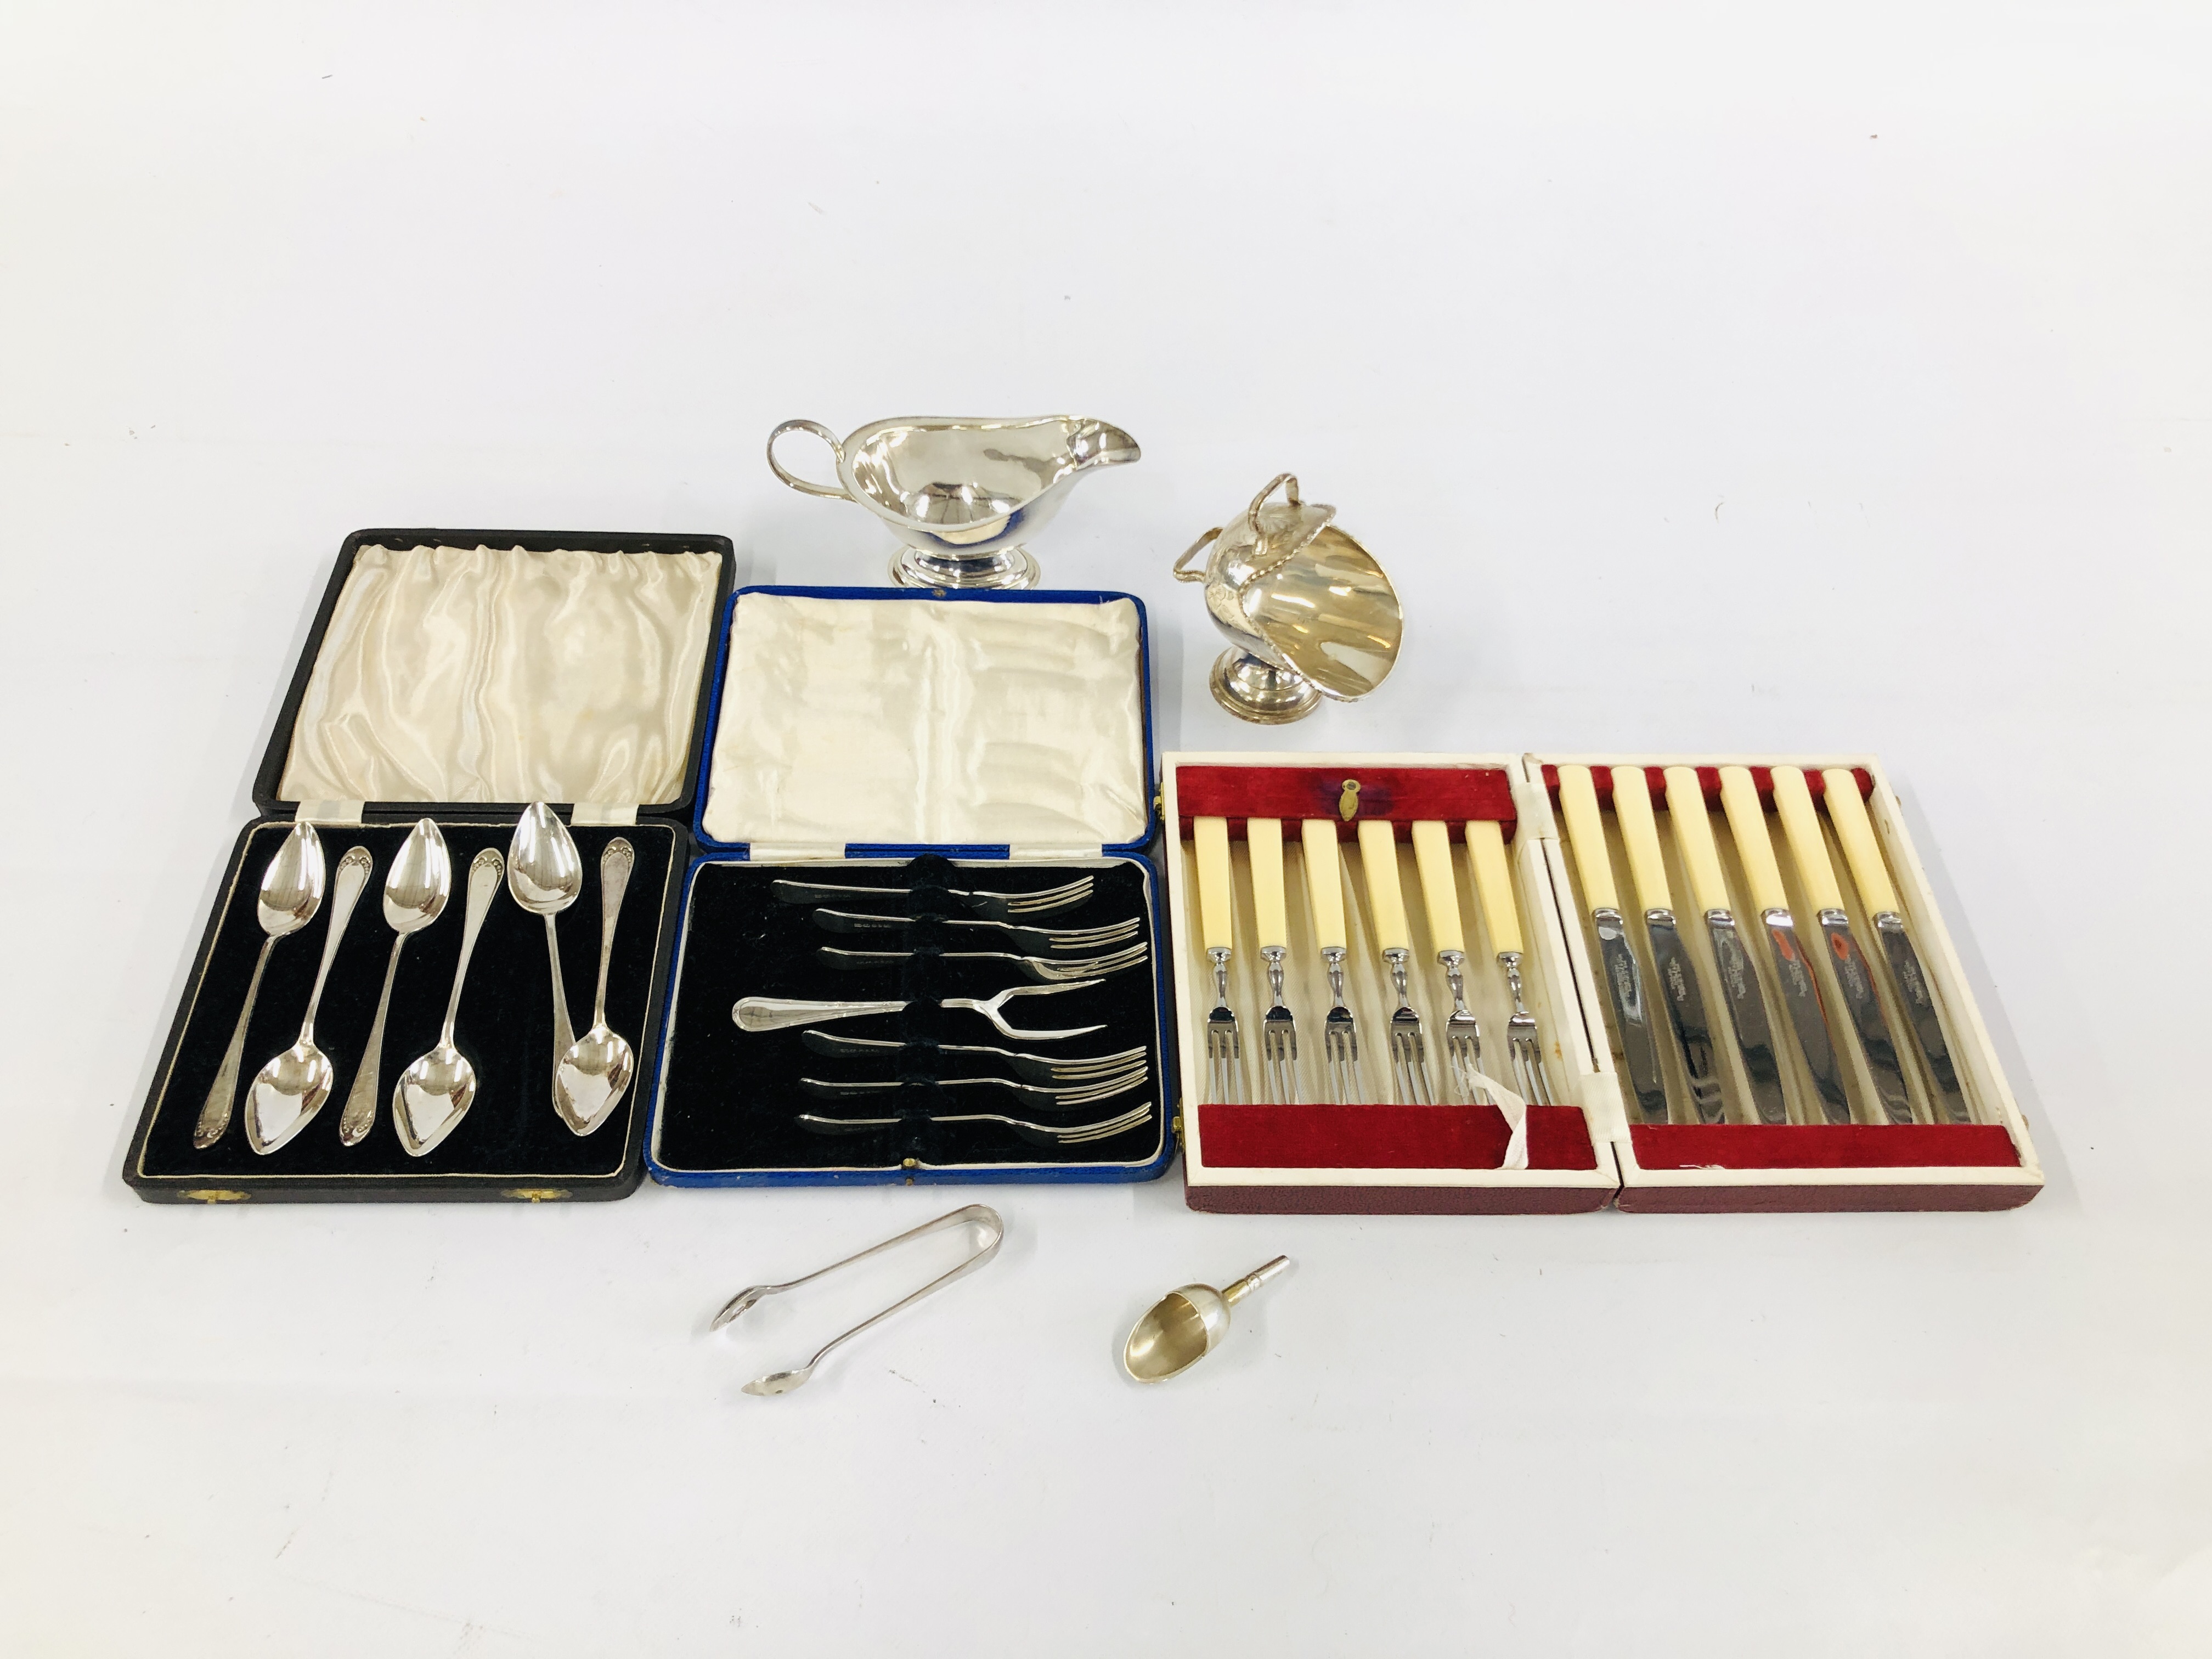 A CASED SET OF SIX GRAPEFRUIT SPOONS, CASED SET OF SIX CAKE FORKS AND SERVER,